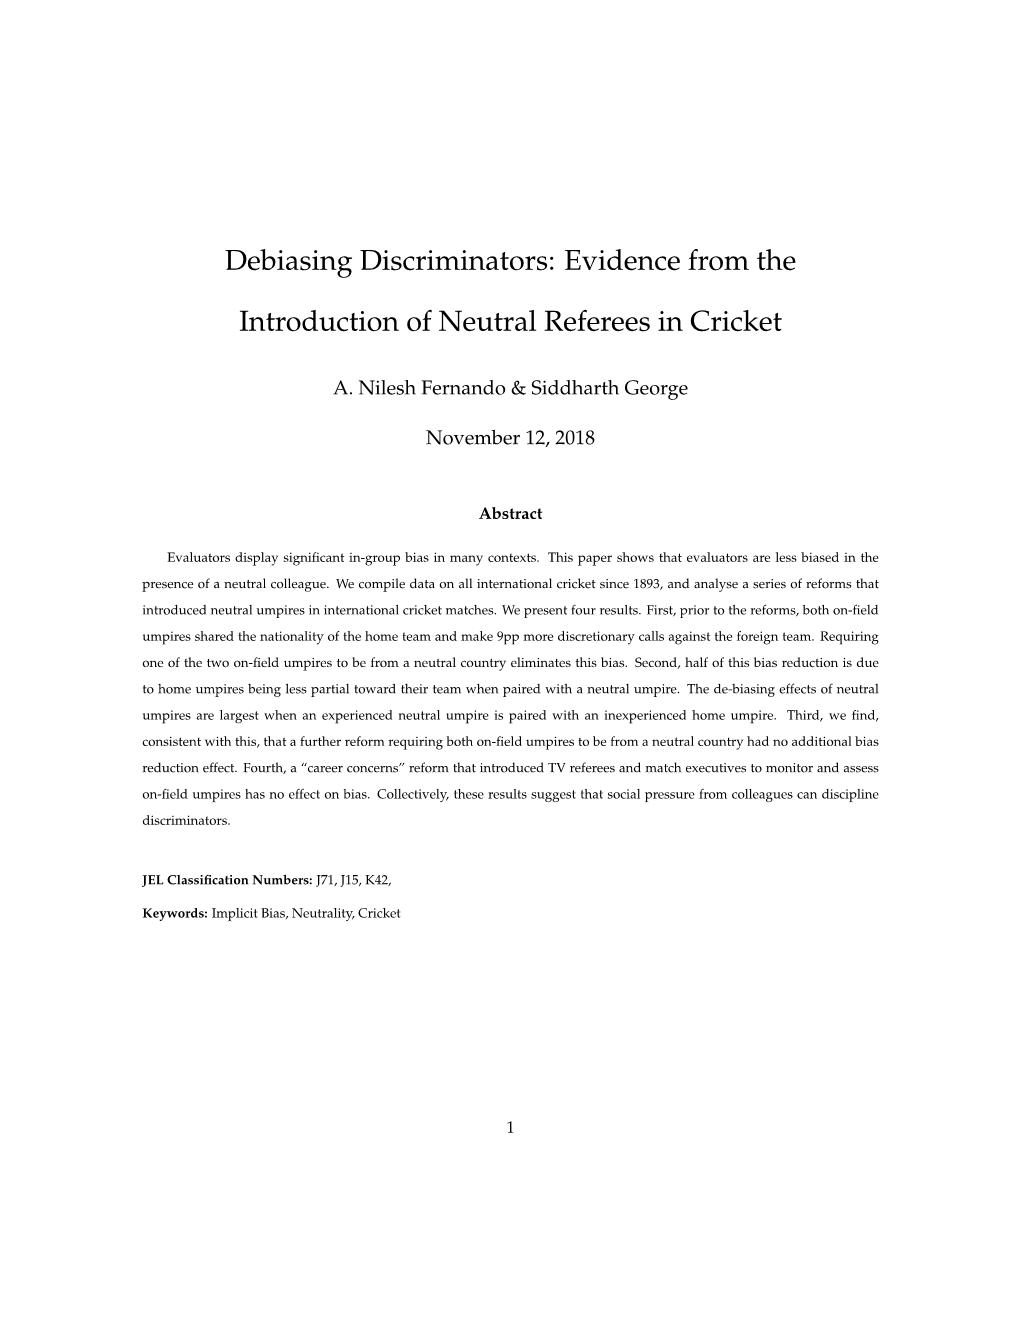 Evidence from the Introduction of Neutral Referees in Cricket